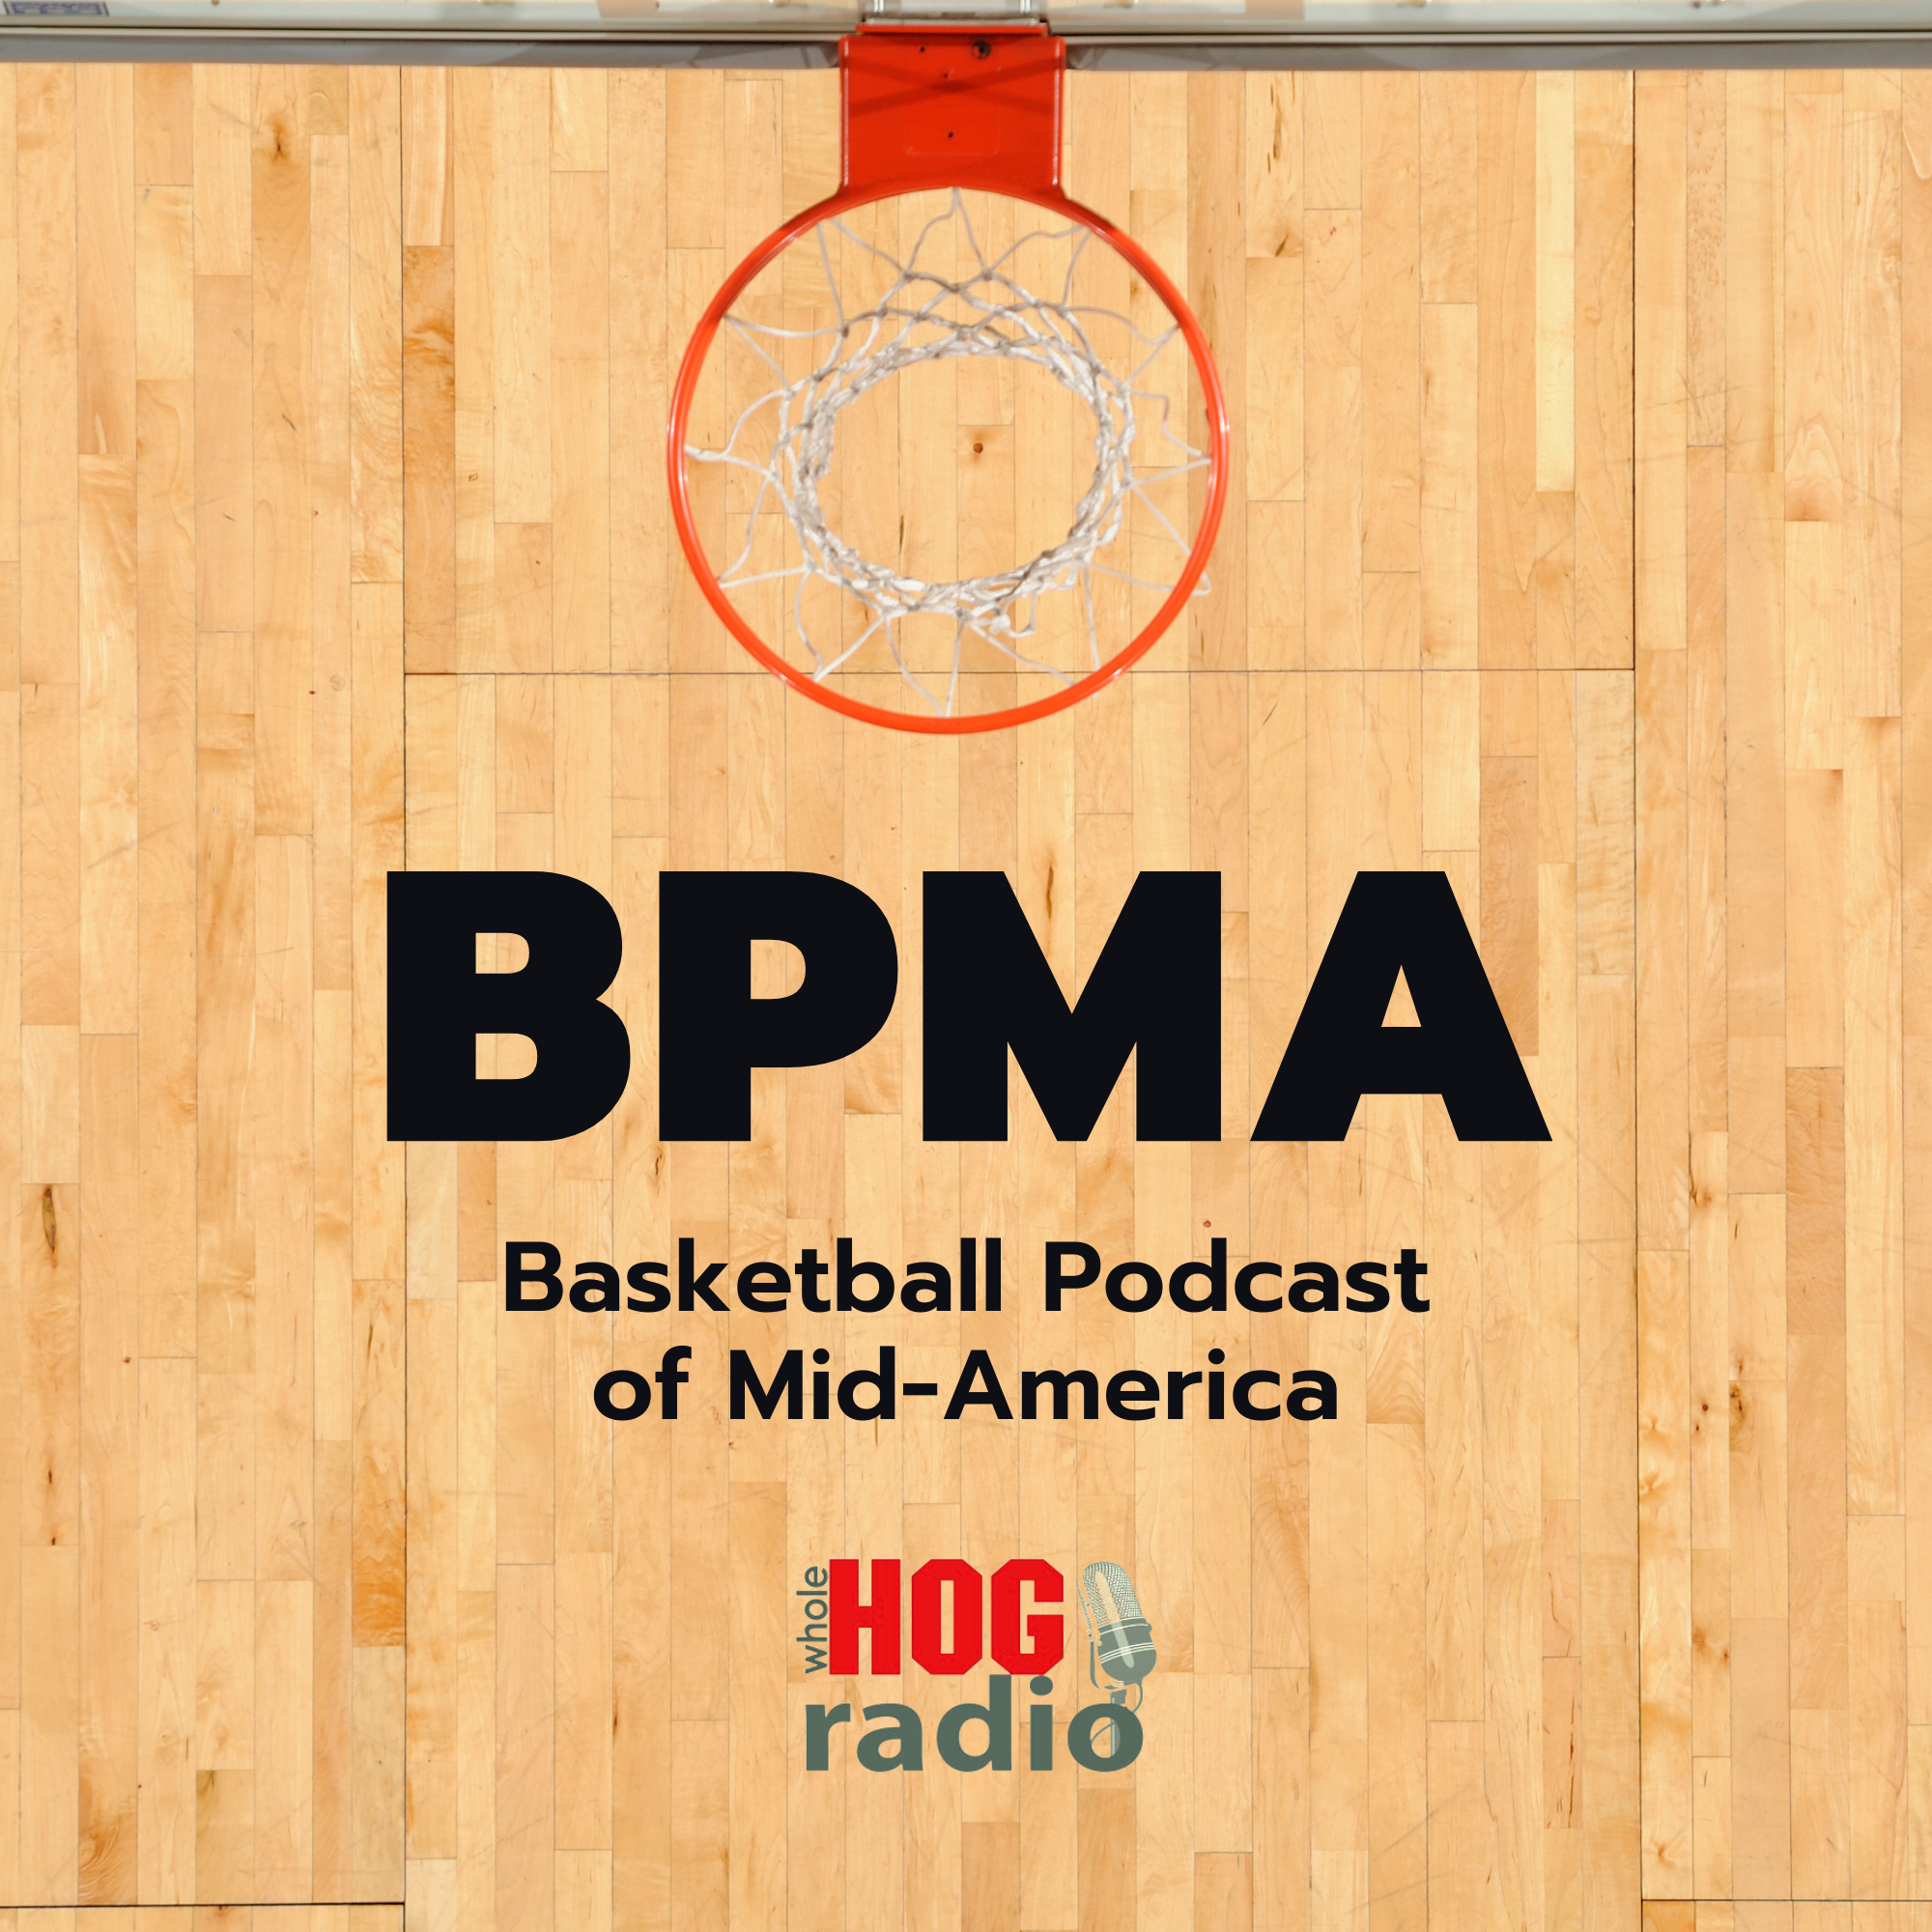 Basketball Podcast of Mid-America: Coming Down the Stretch